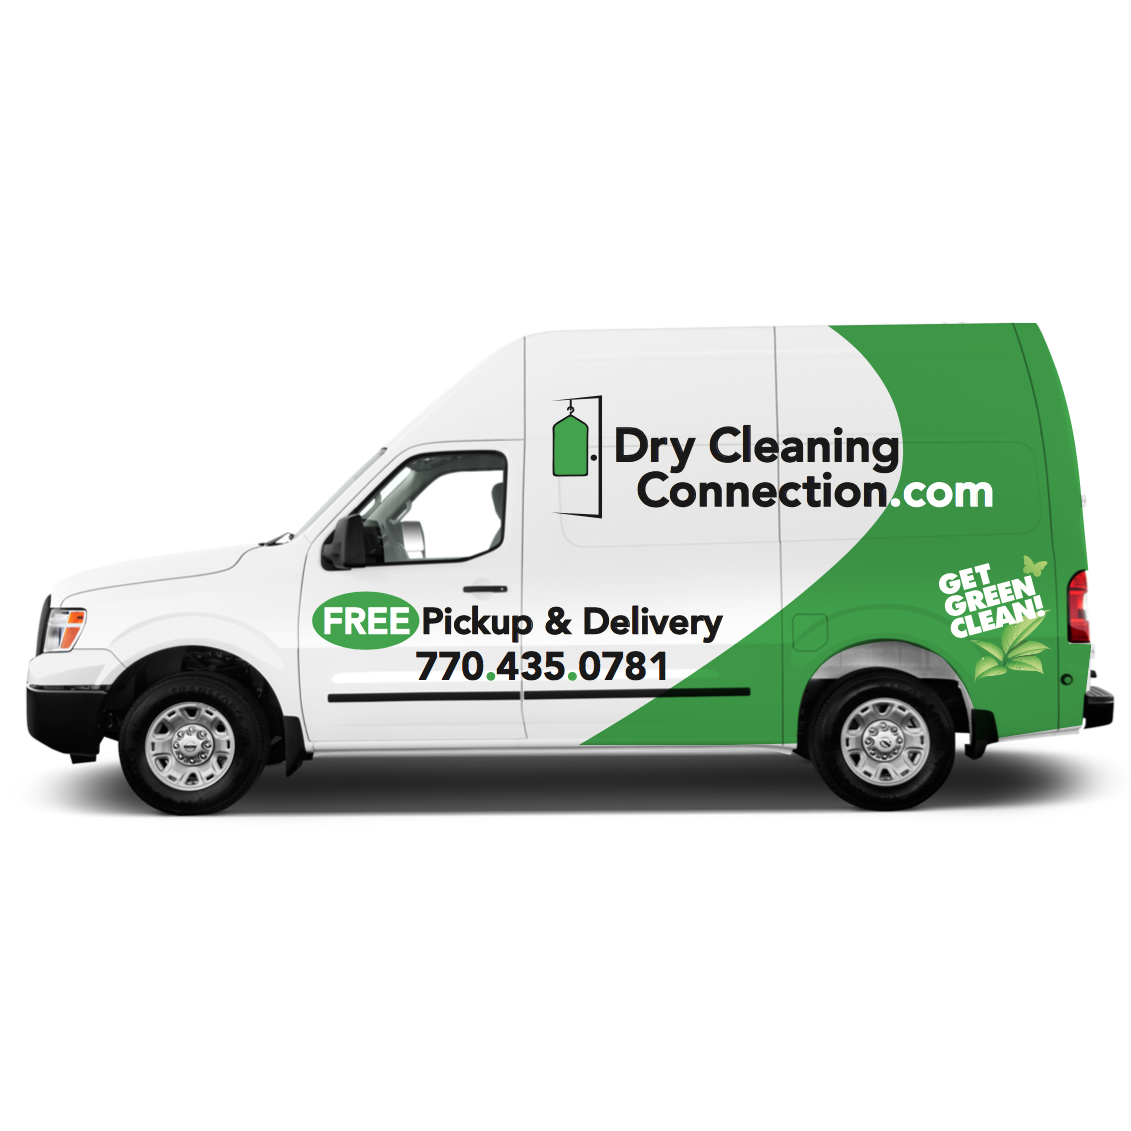 Dry Cleaning Connection Coupons near me in | 8coupons